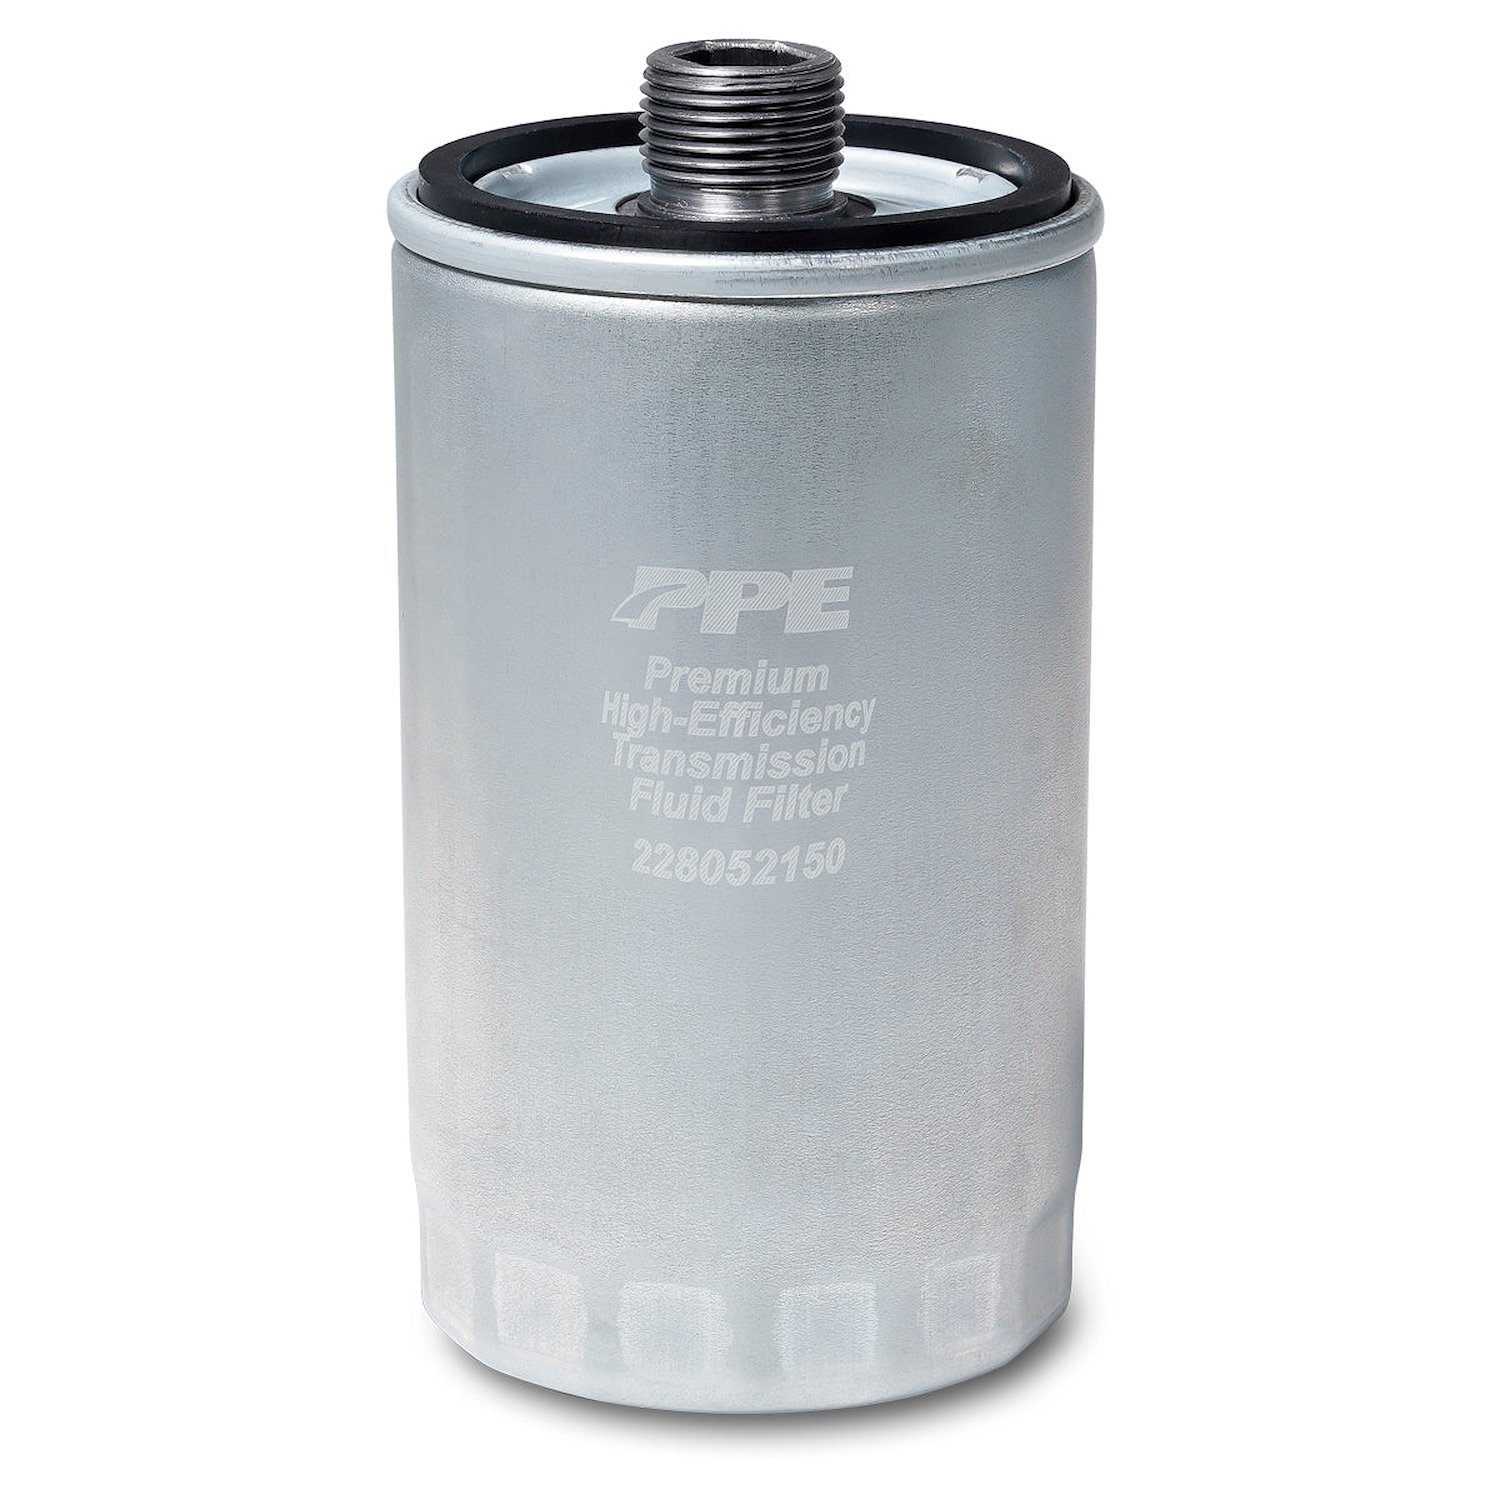 228052150 Filter Trans Fluid 68RFE Spin-On (Requires PPE 68RFE Transmission Pan 2280521XX)